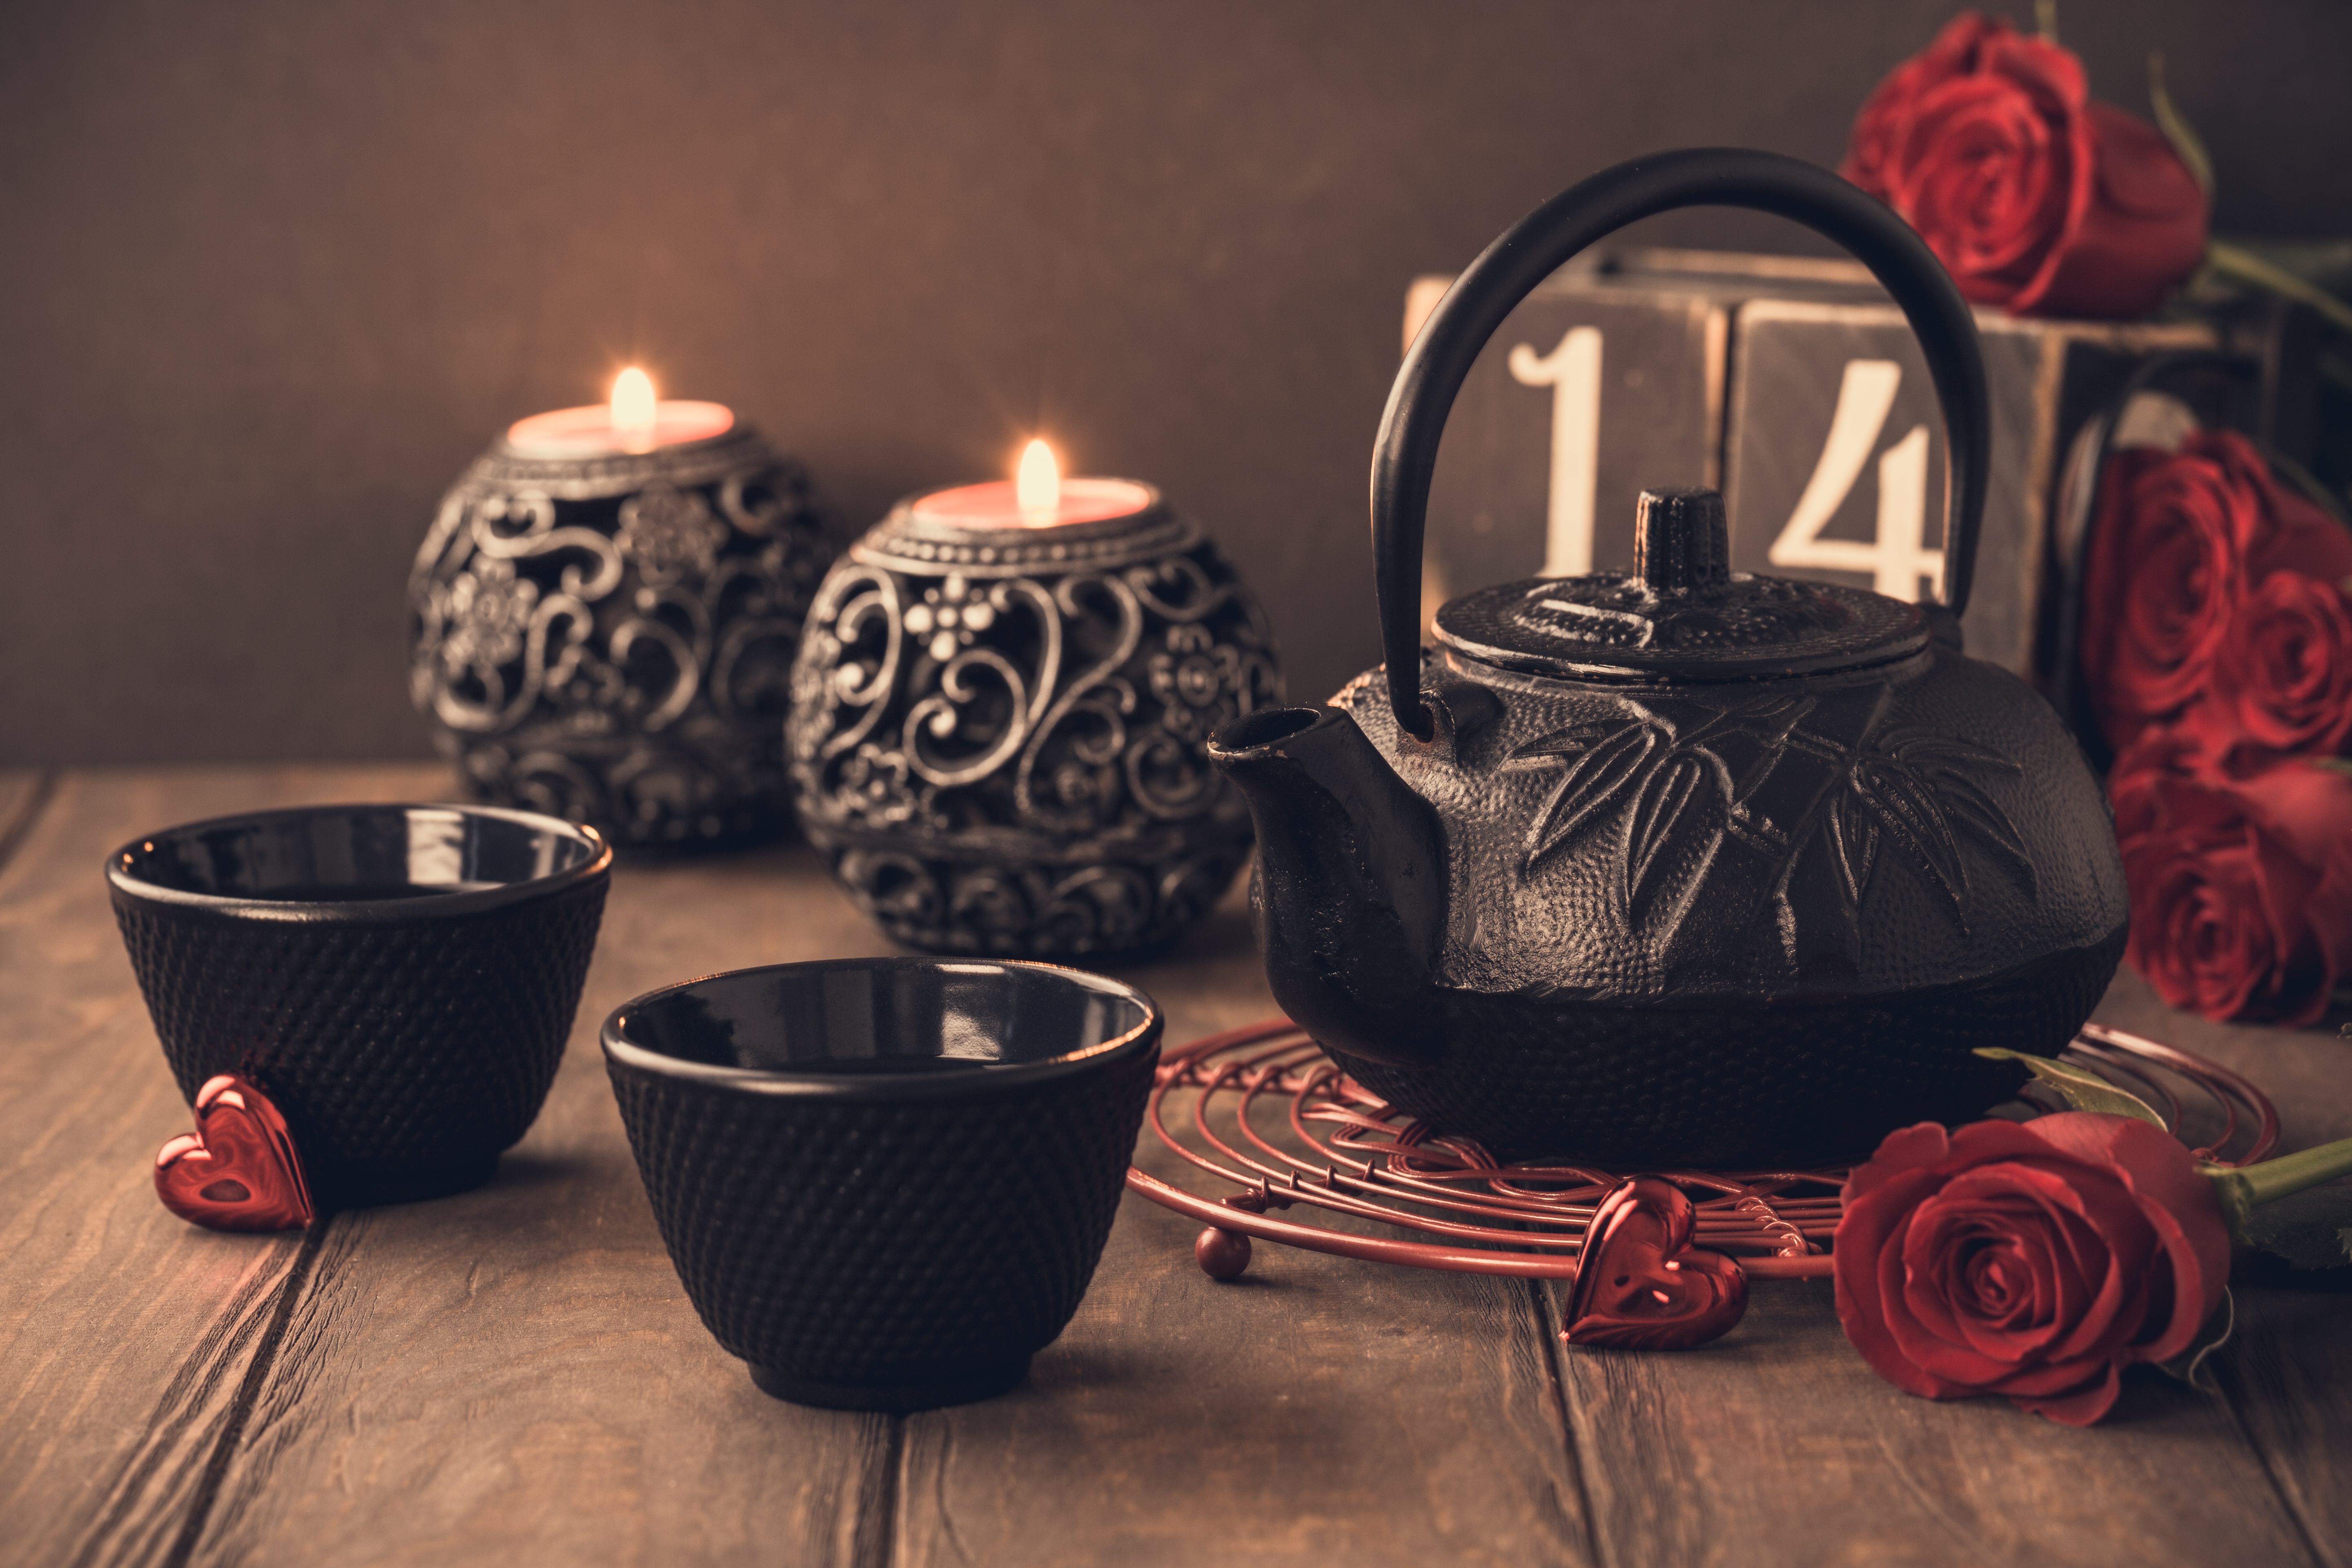 holiday, valentine's day, candle, cup, kettle, red flower, rose, still life